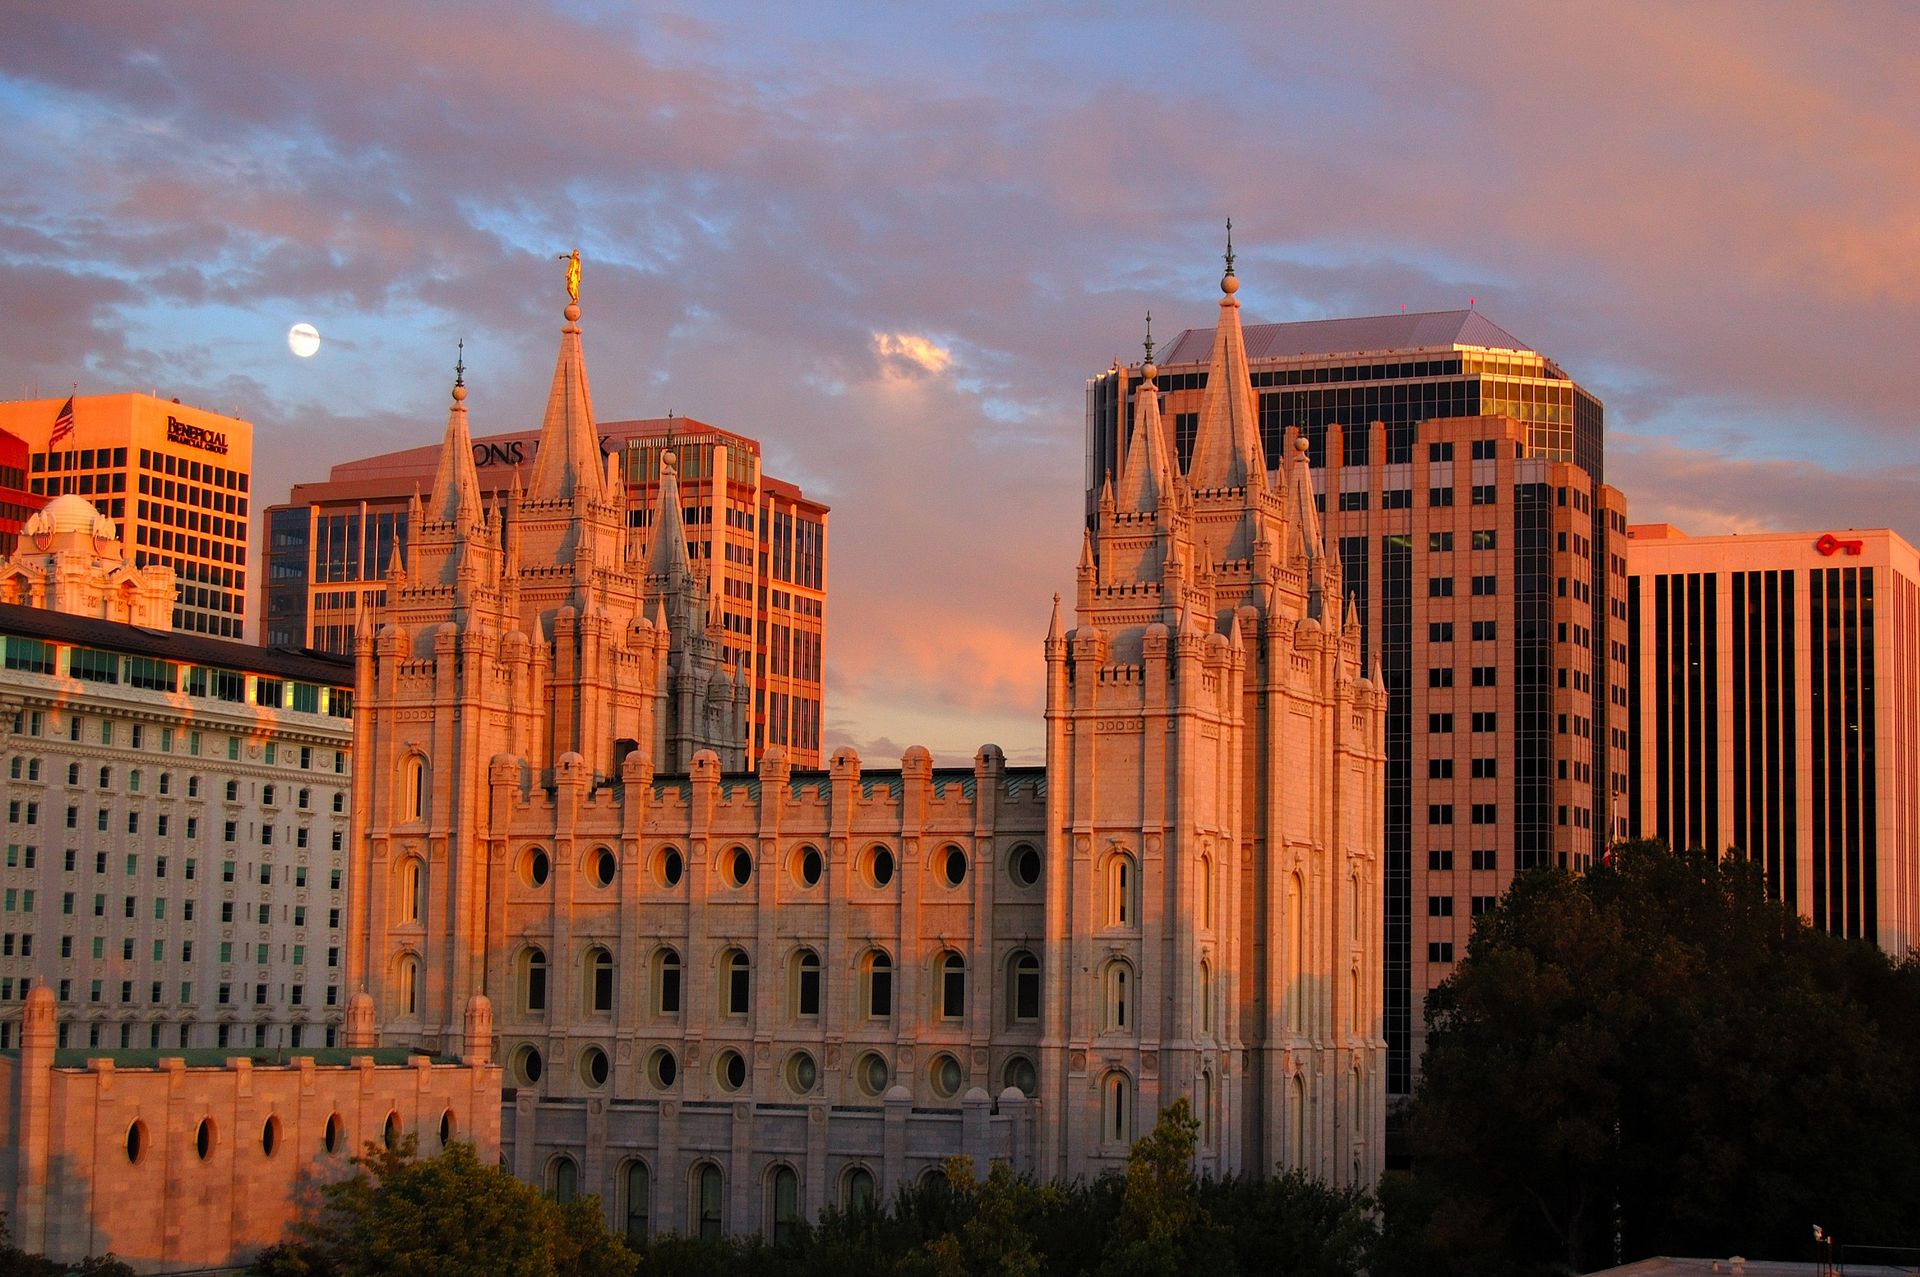 The Salt Lake Temple at sunset, including the scenery and city.